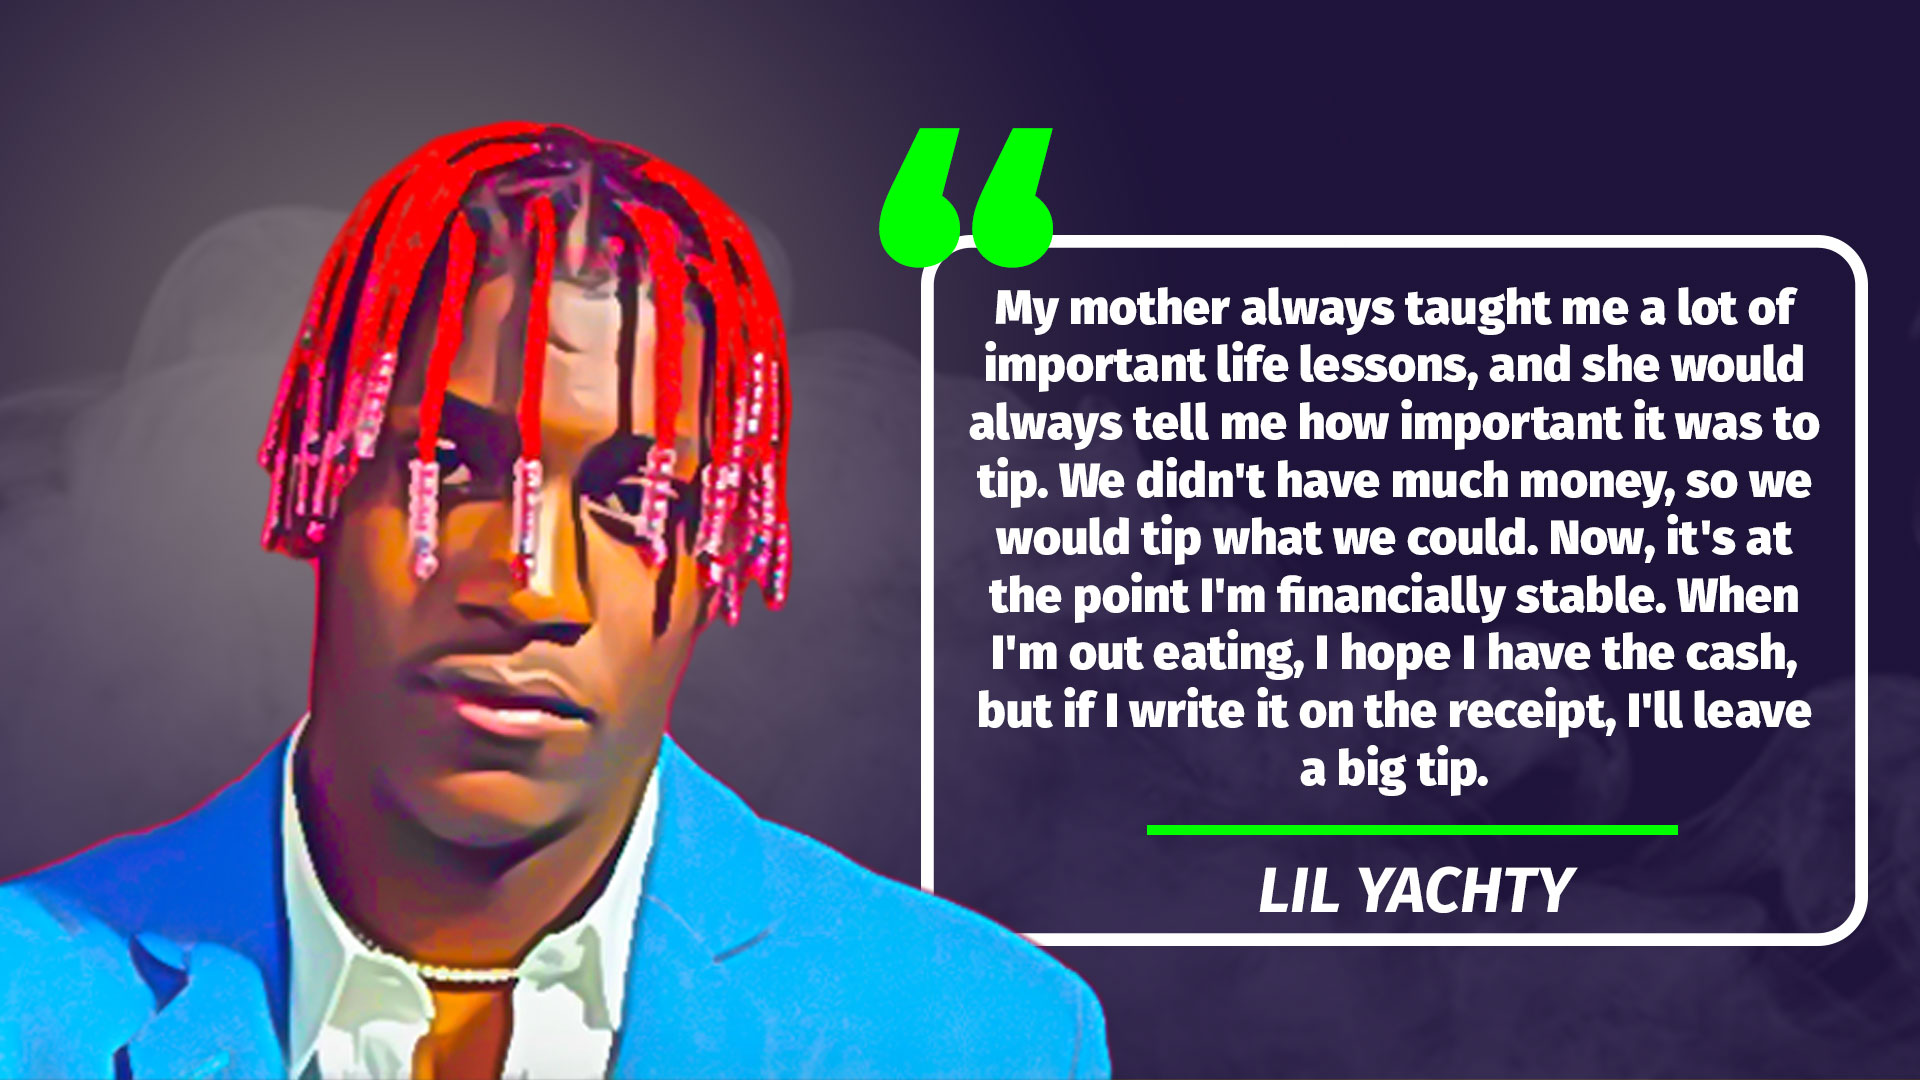 LIL-YACHTY-QUOTE-1